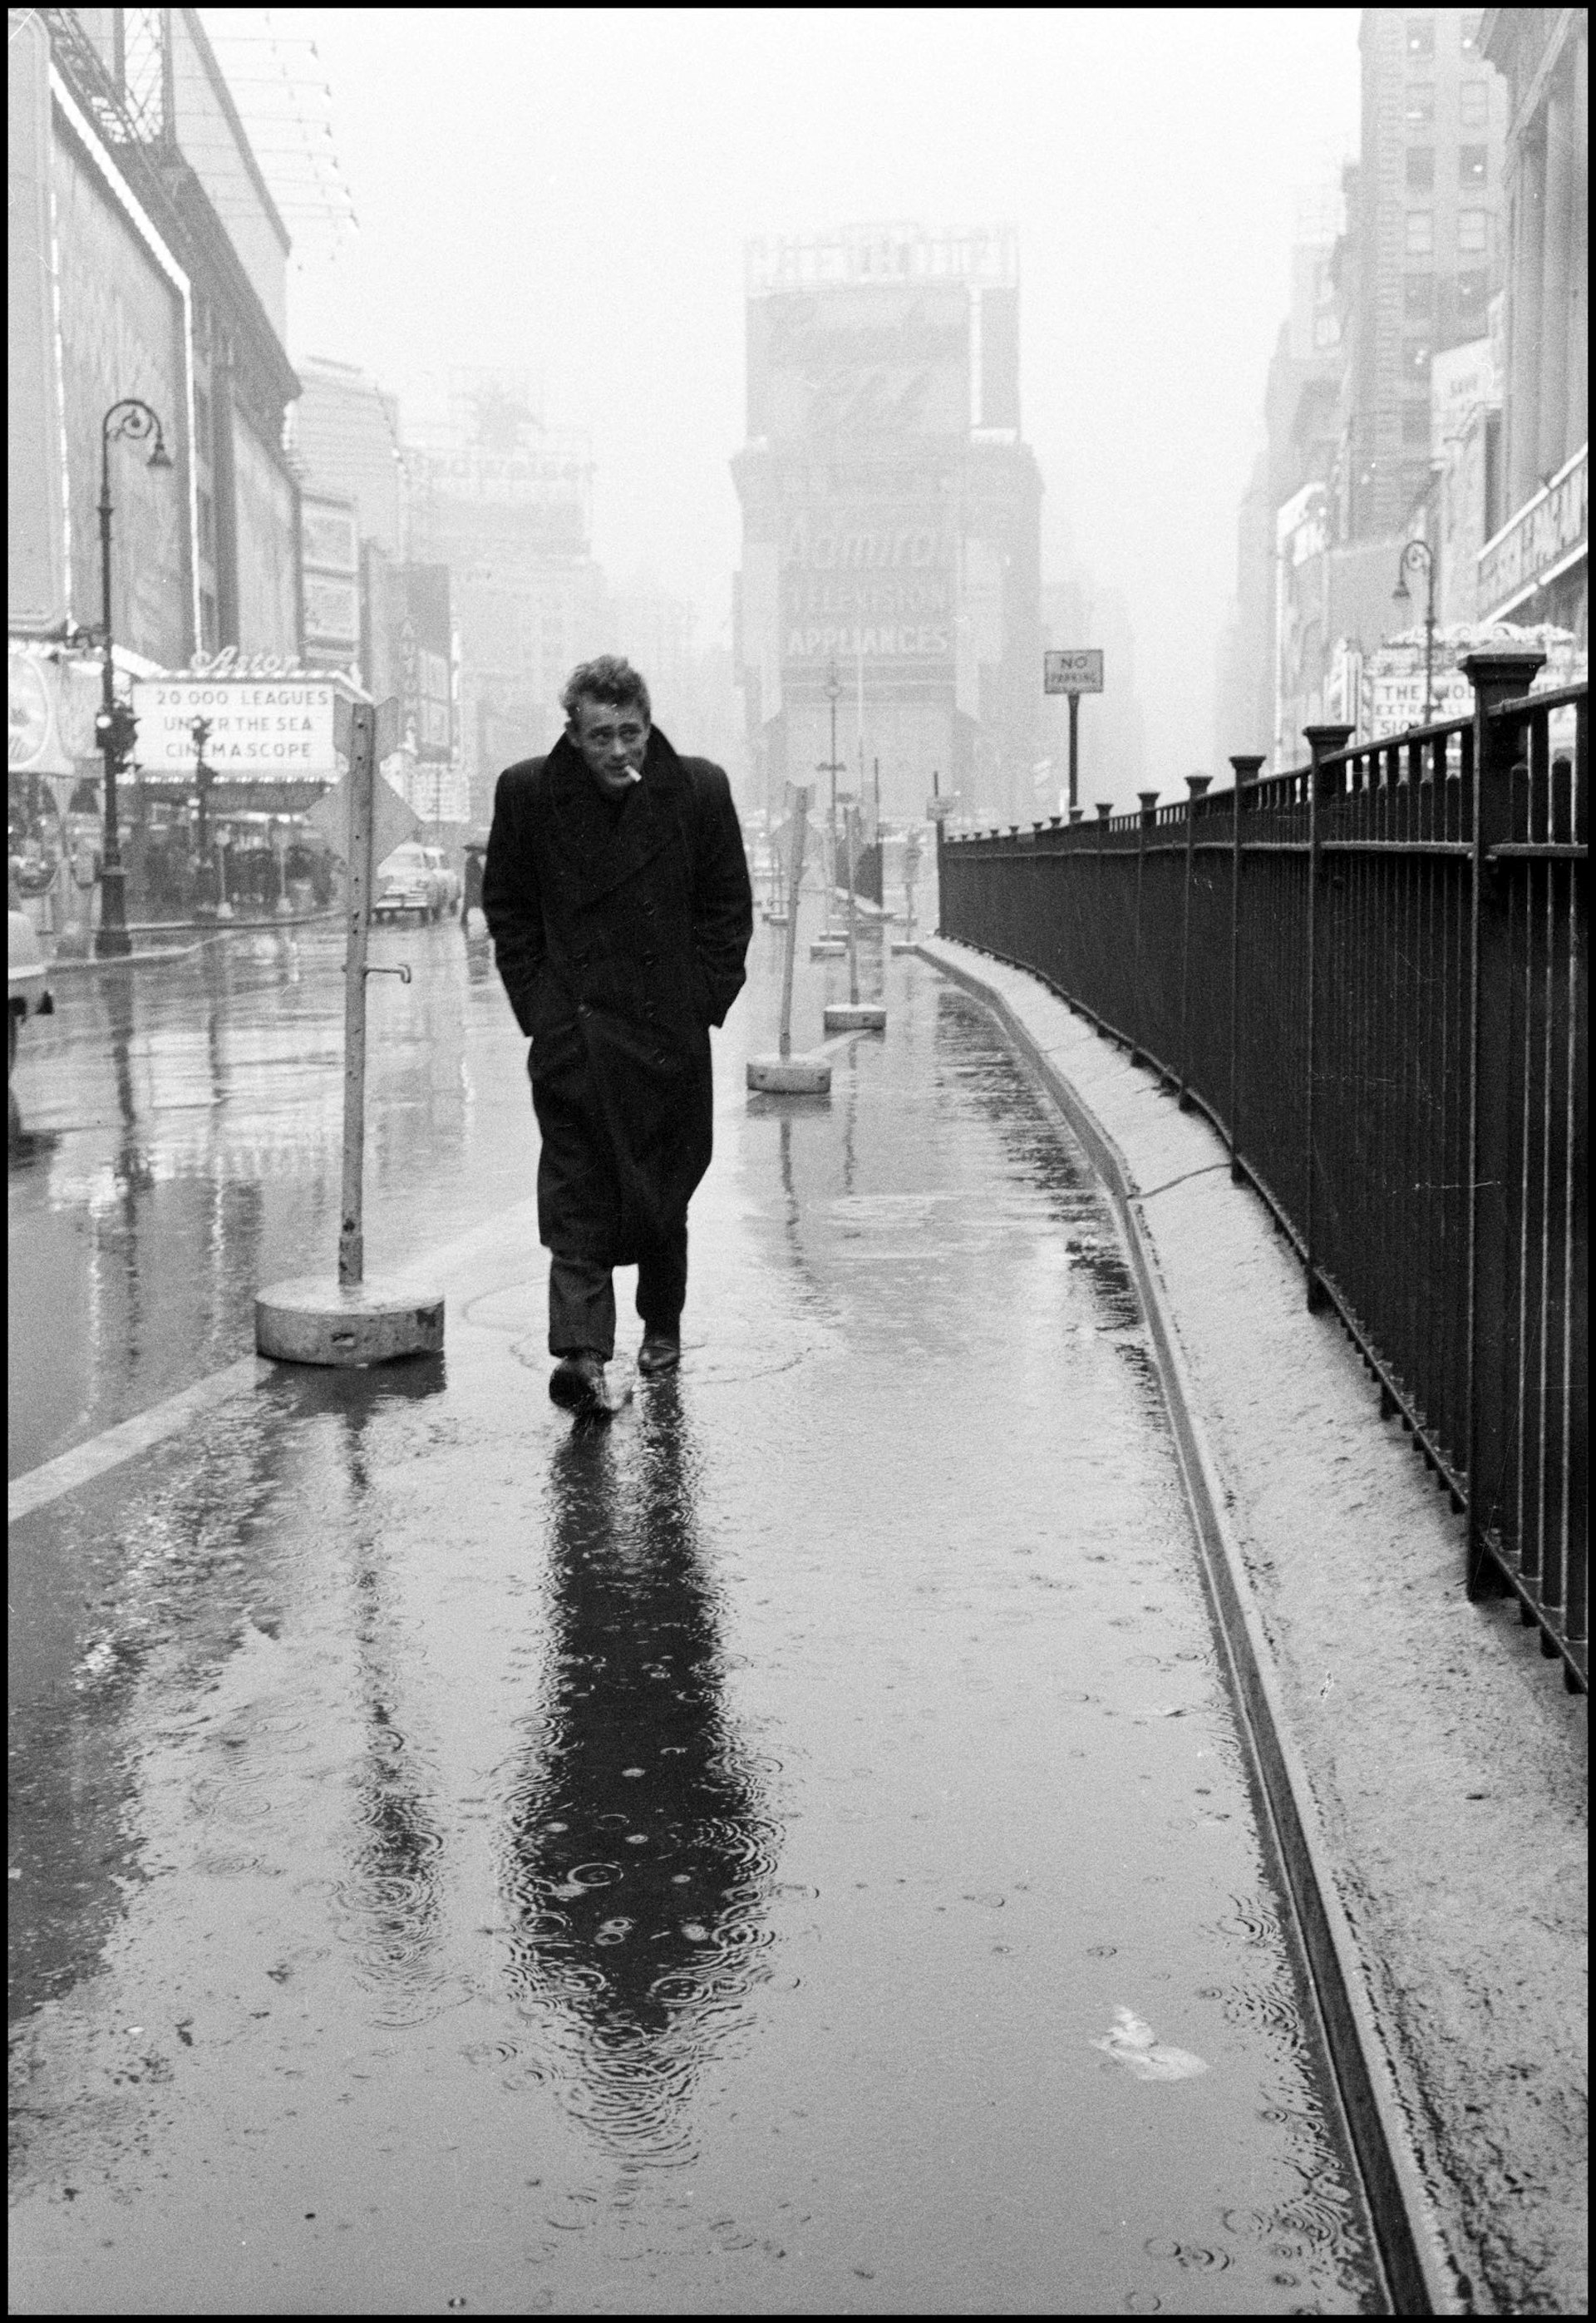 USA. New York City. 1955. James Dean haunted Times Square. Photo by Dennis Stock.